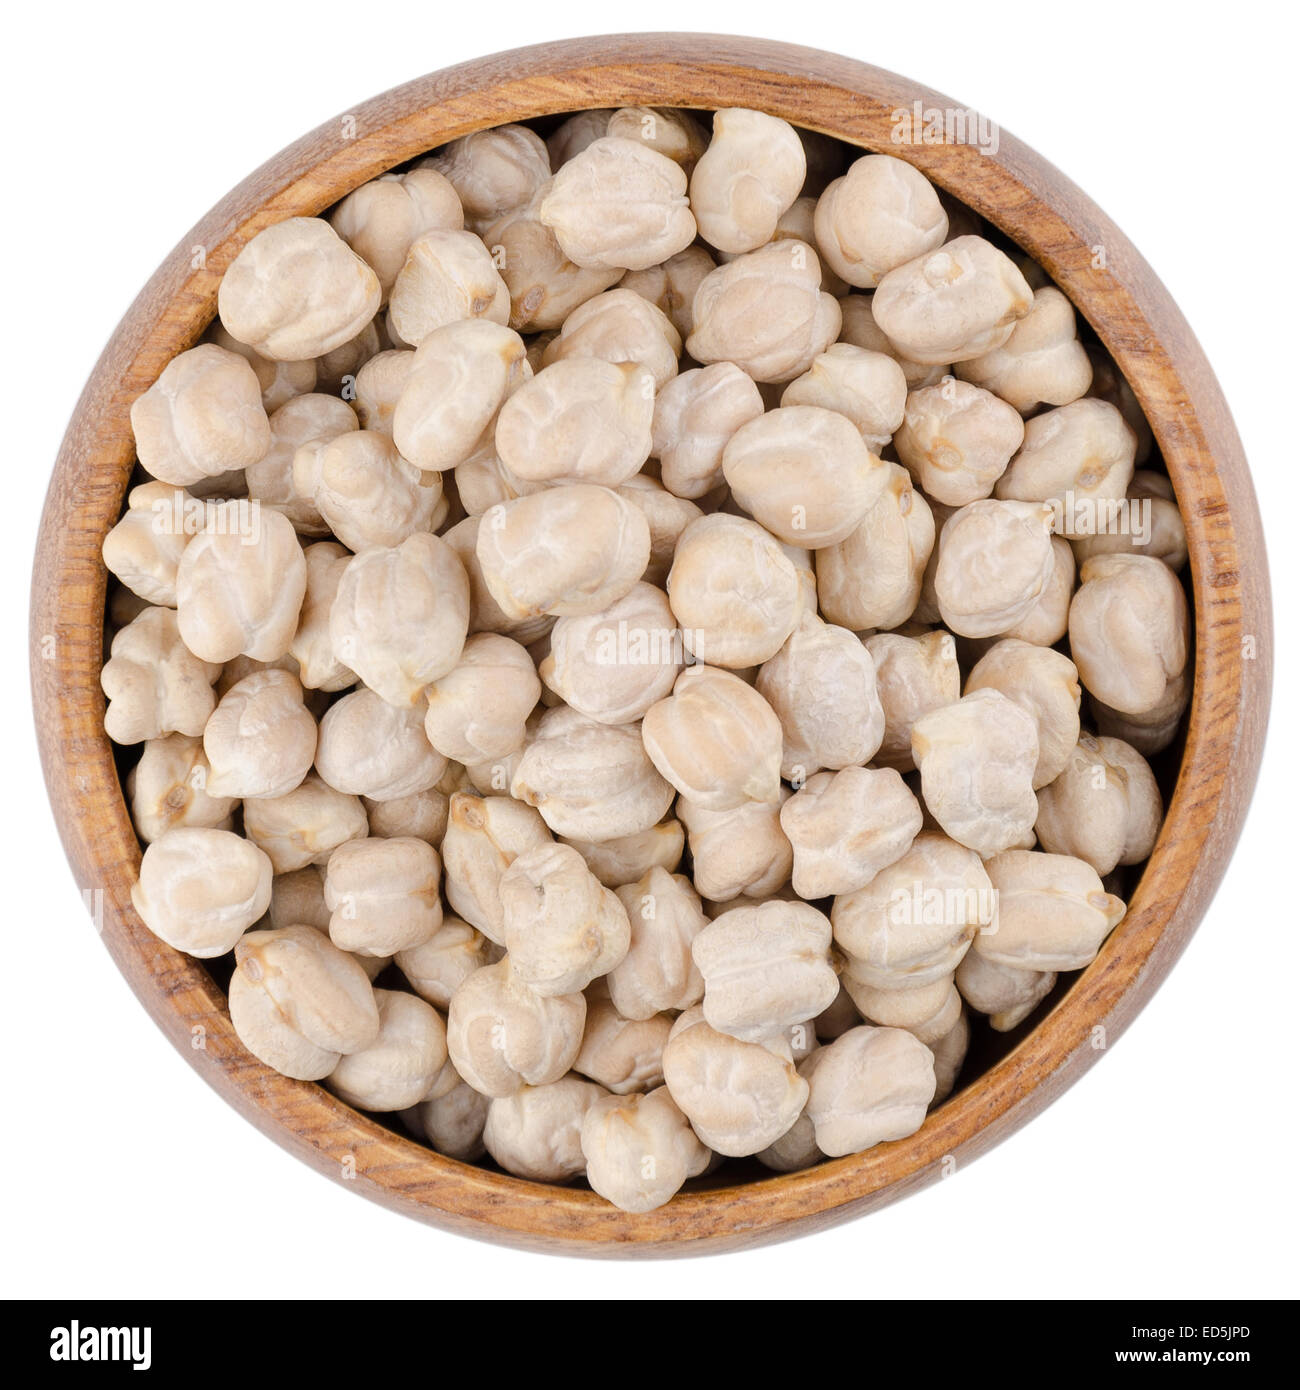 White Chickpeas in a Bowl. White chickpeas in a wooden bowl from above, isolated on white background. Stock Photo